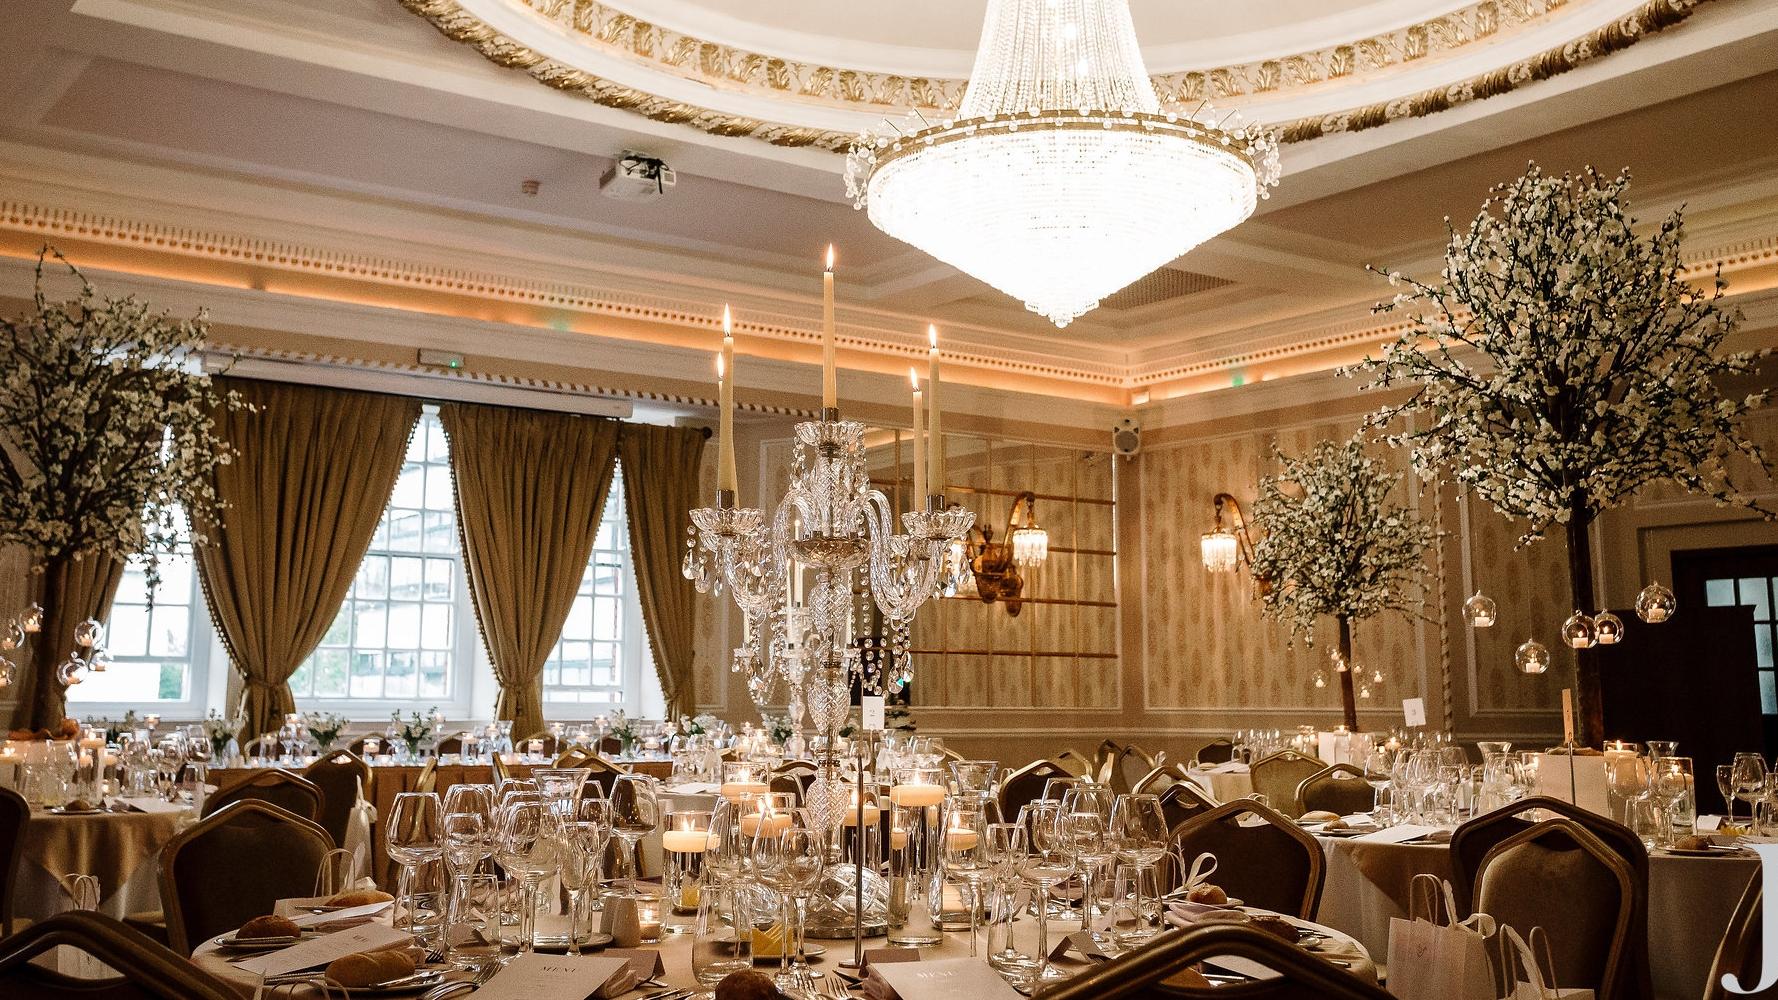 Gala Dinner Venues for Hire in Manchester